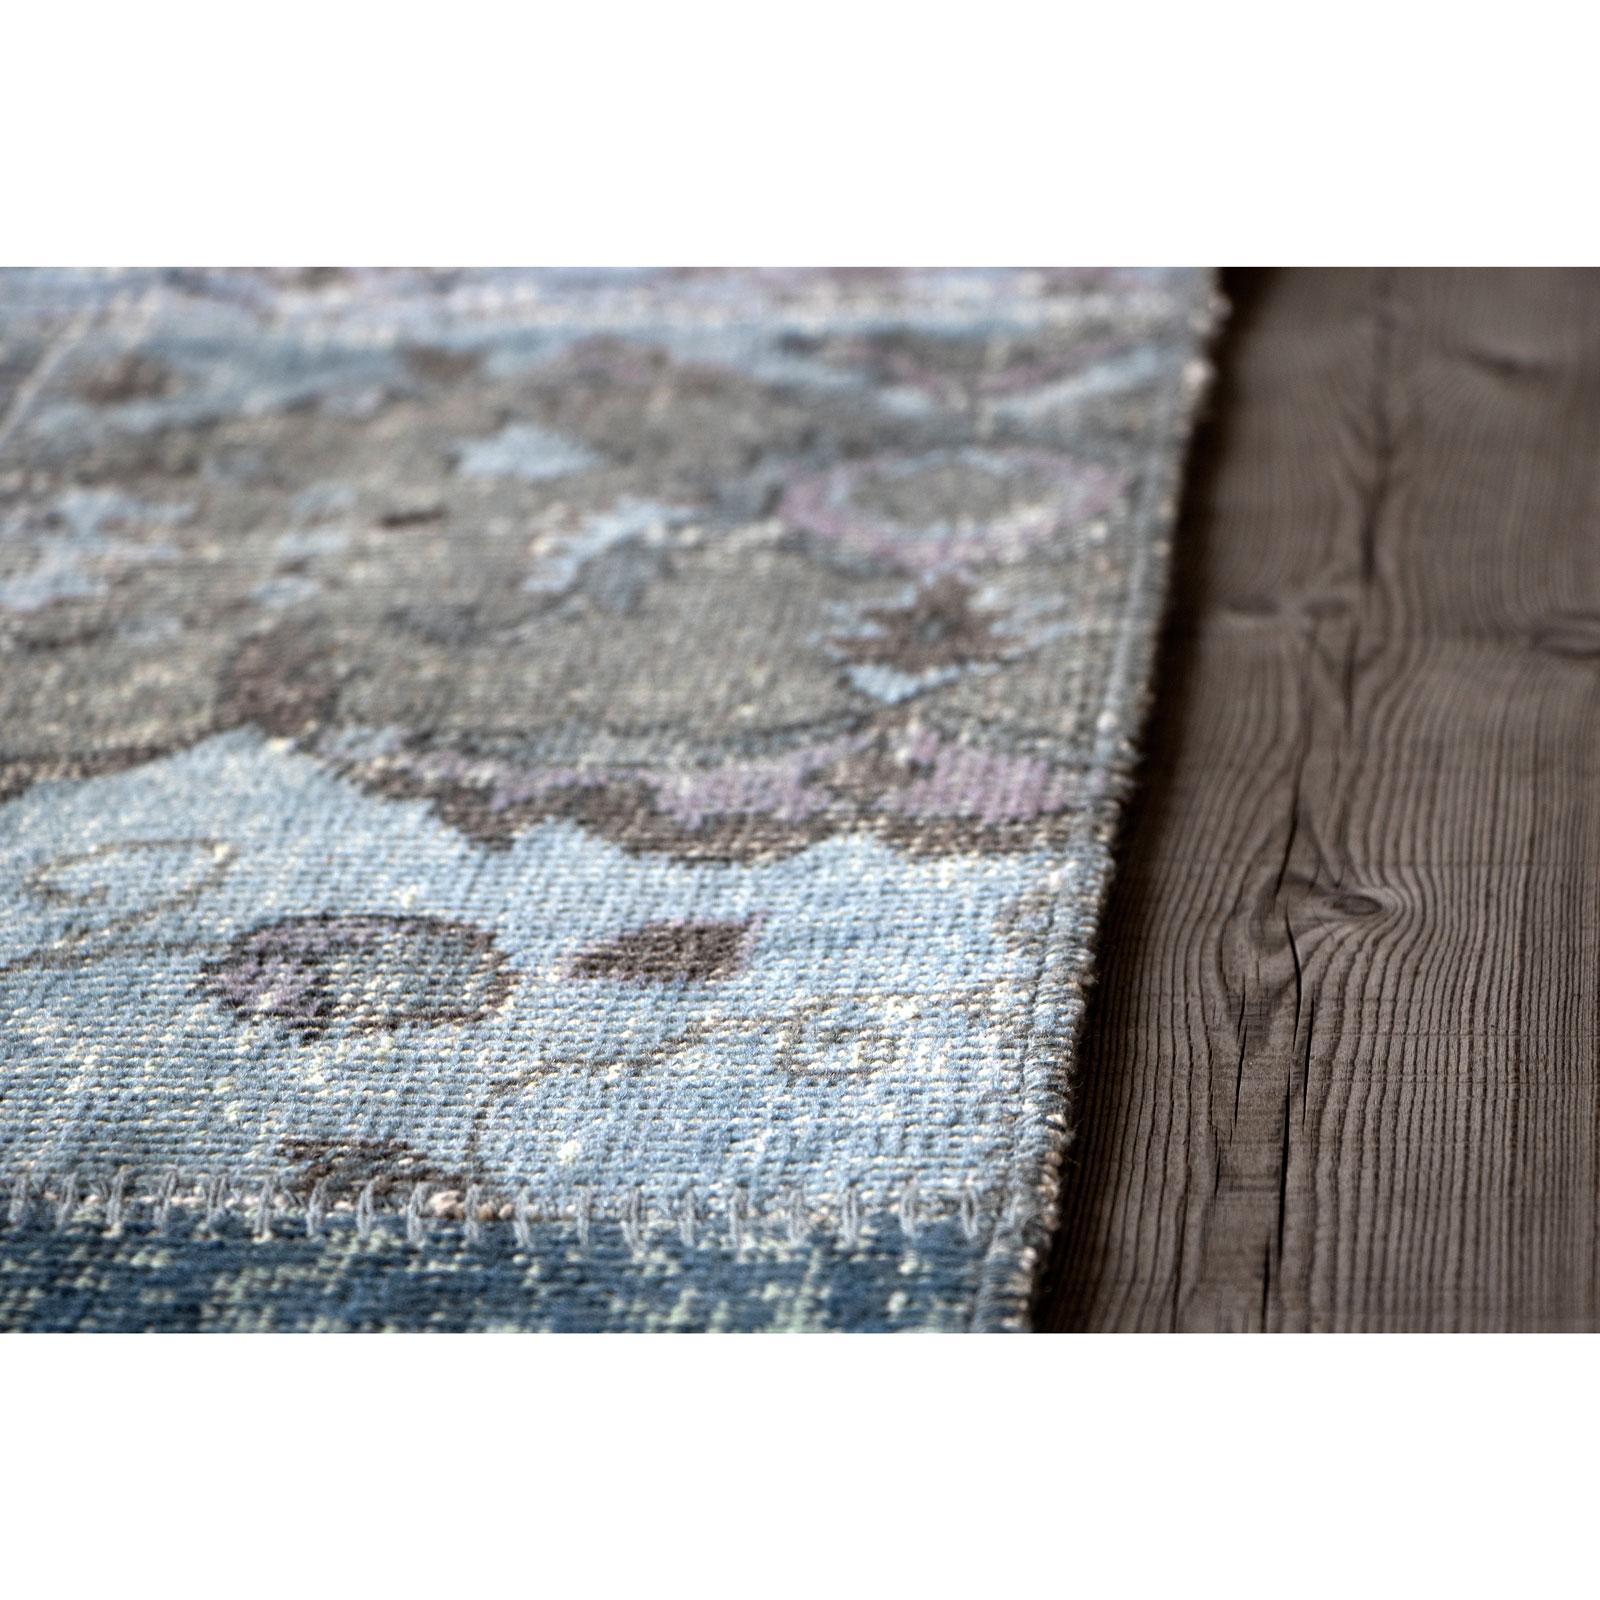 Antique Chic Vintage Blue Brown Wool Cotton Rug by Deanna Comellini 250x350 cm For Sale 3